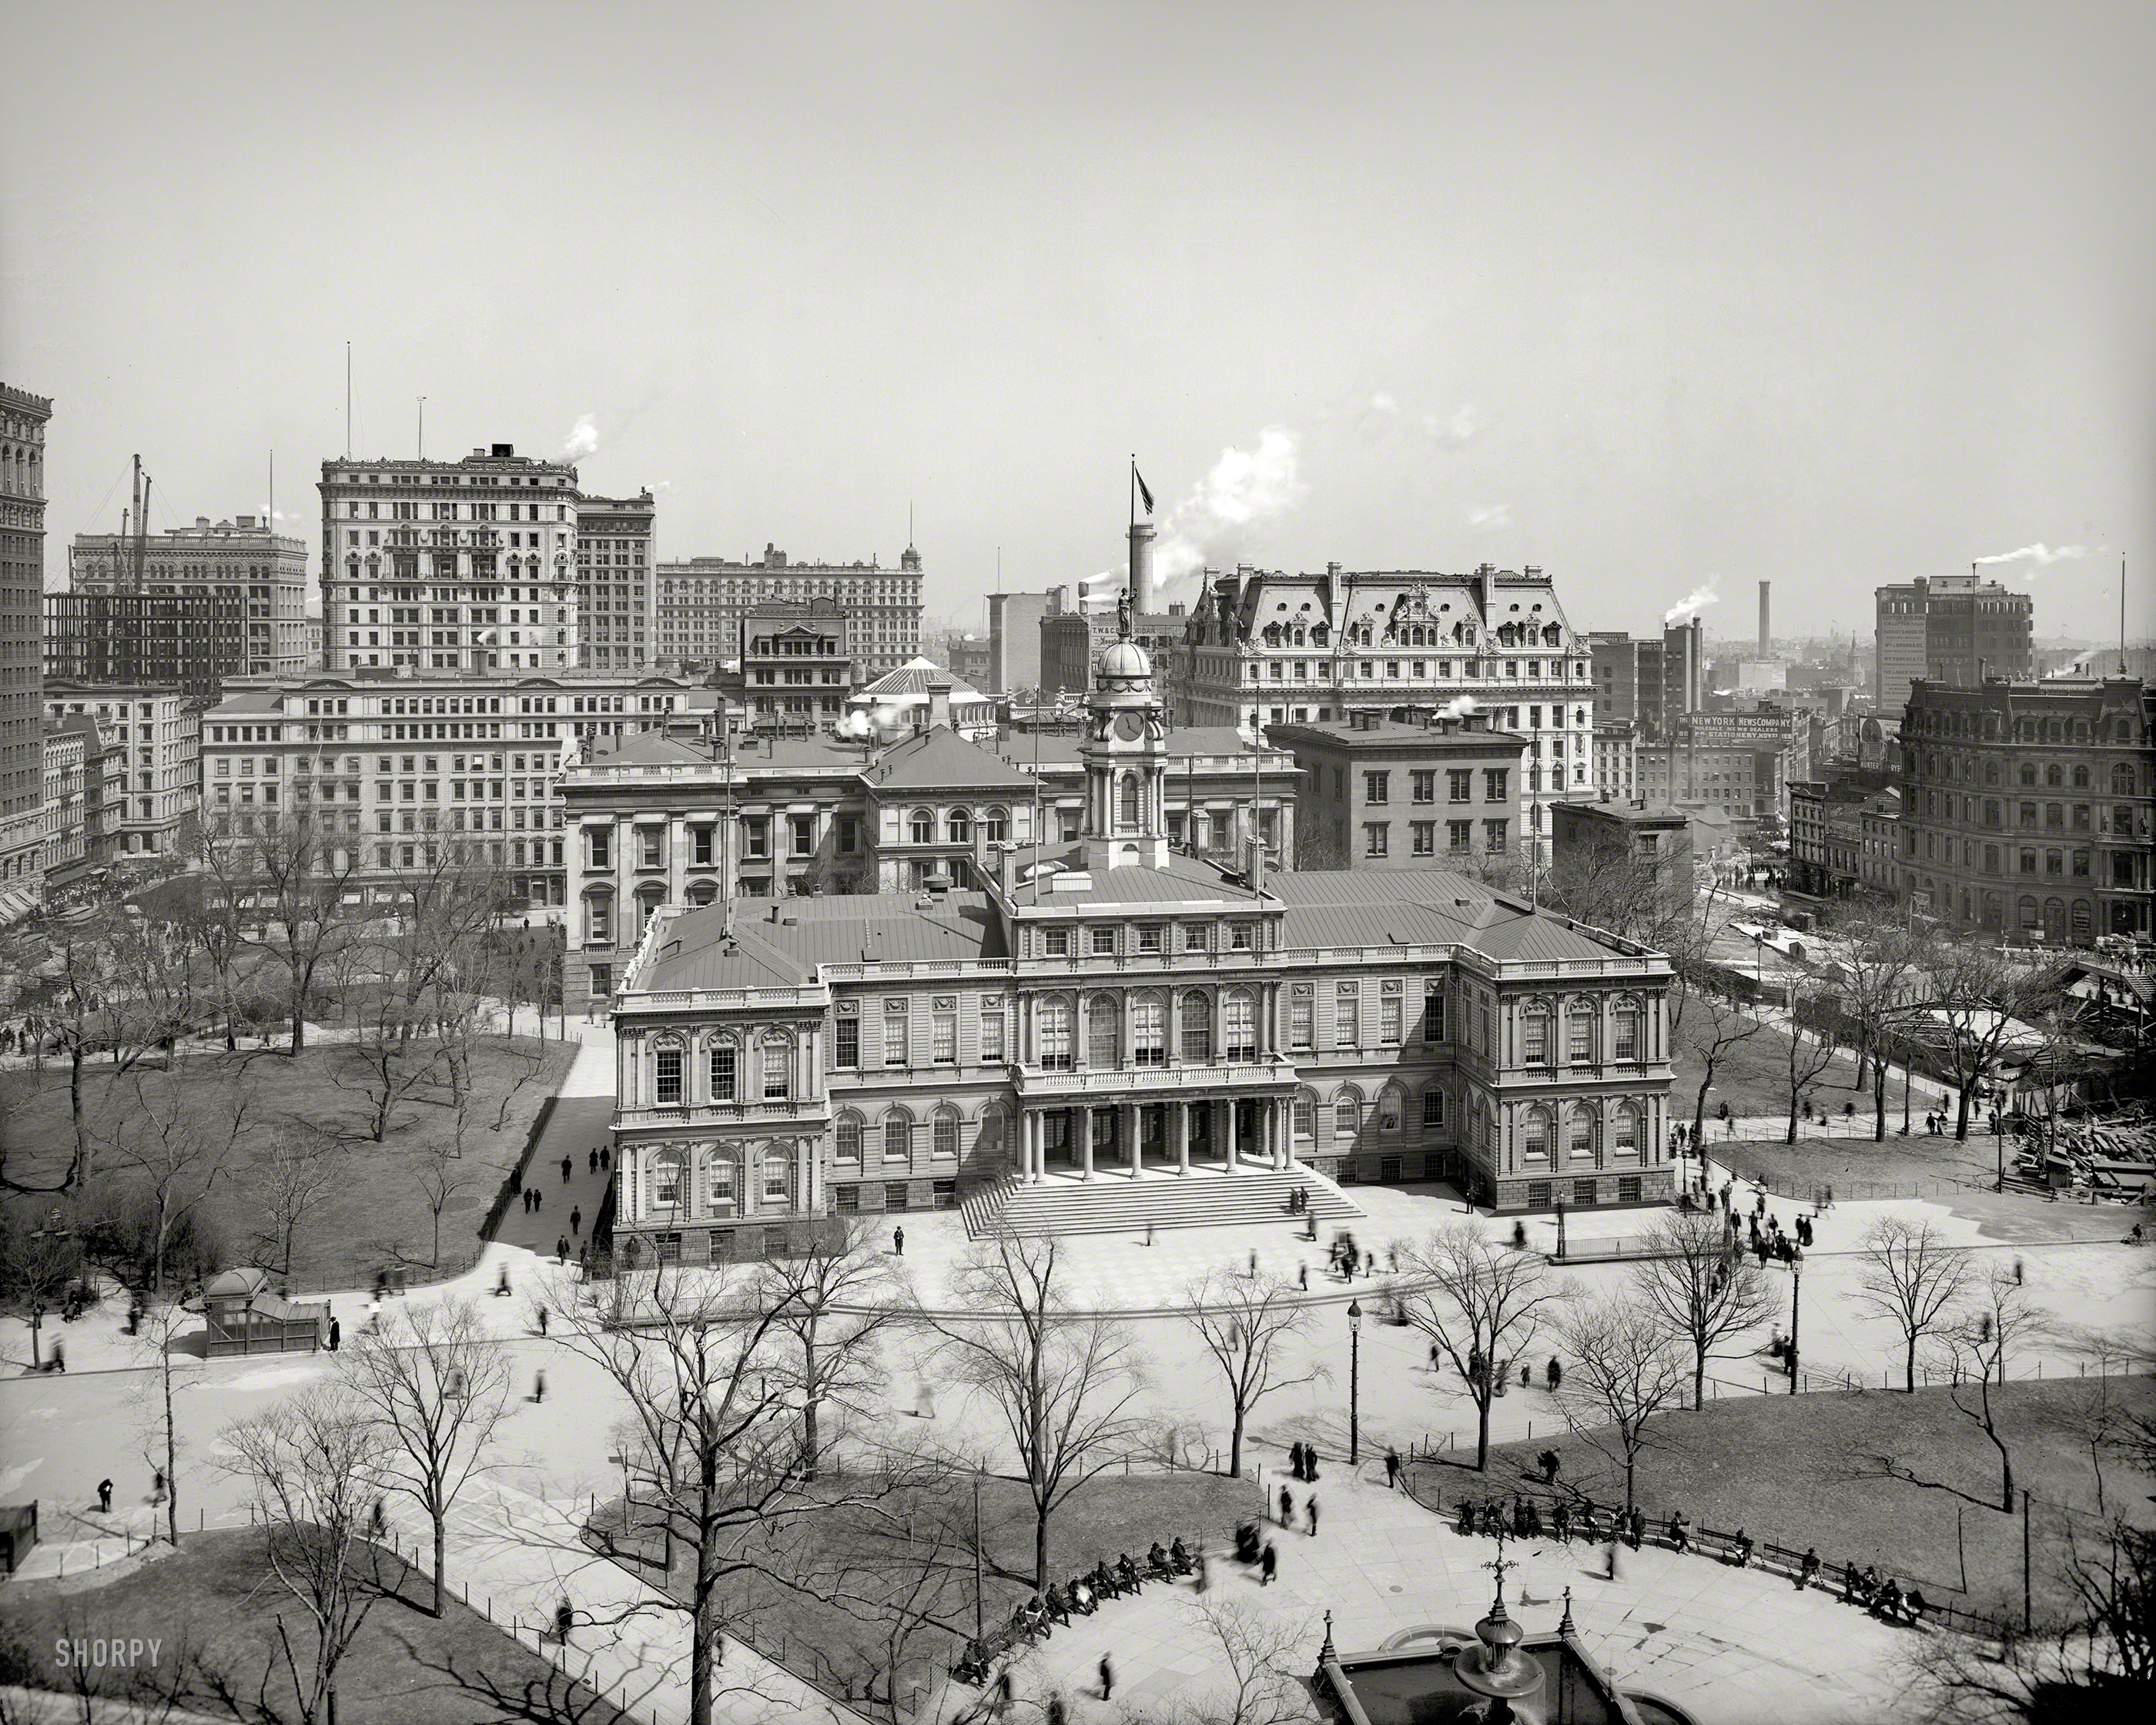 New York circa 1903. "City Hall." Note the building going up at left and construction at right. 8x10 glass negative, Detroit Publishing Co. View full size.